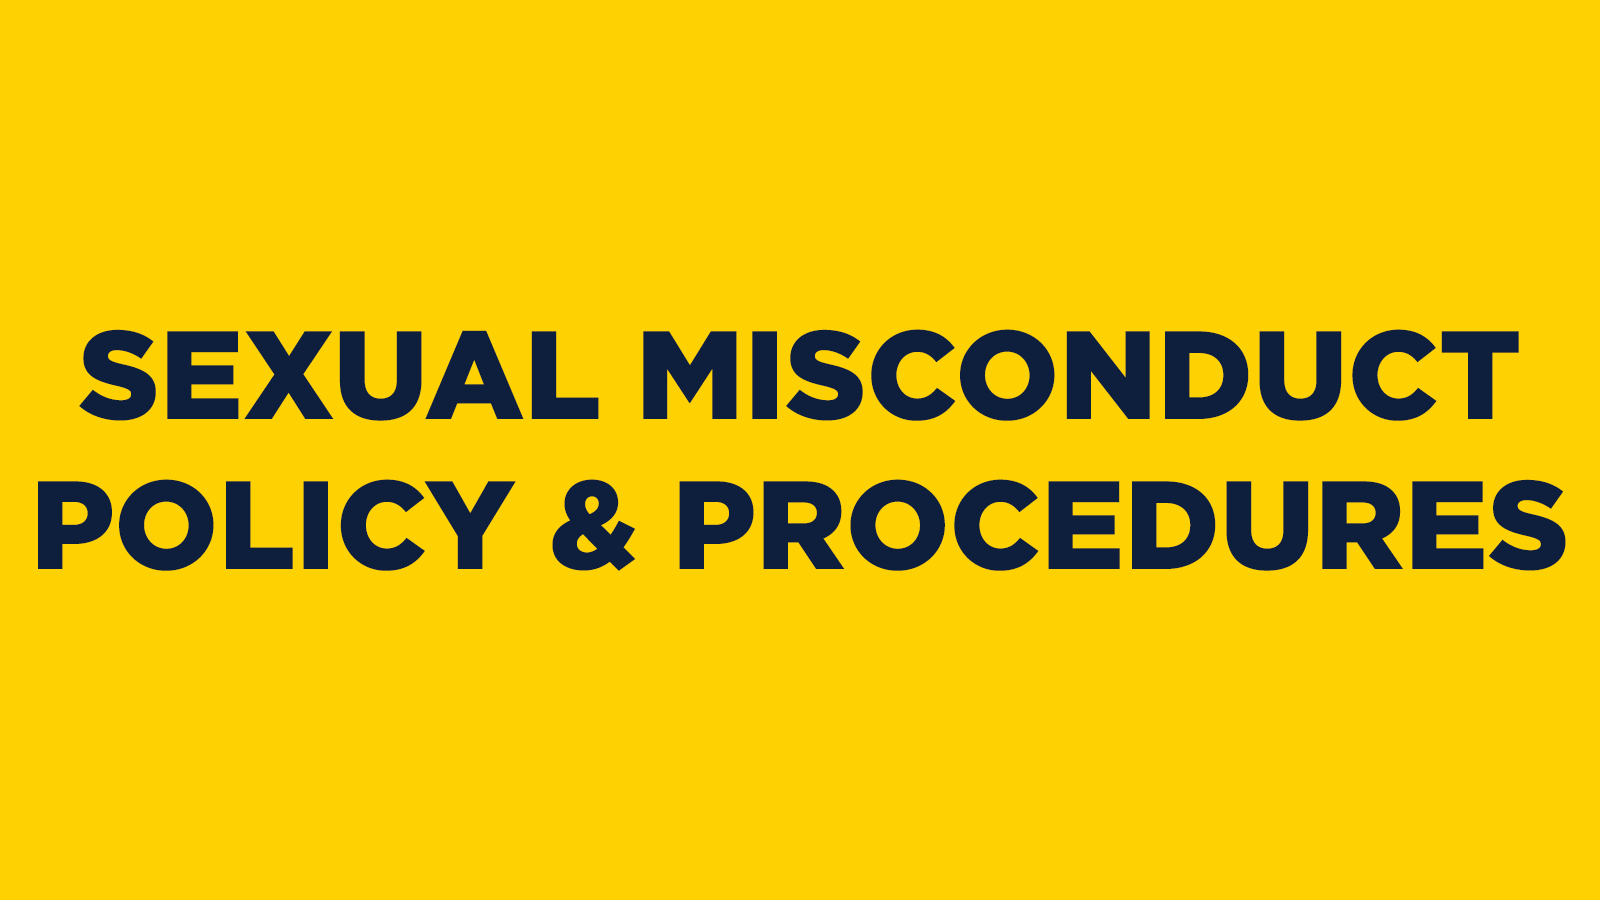 Sexual Misconduct Policy & Procedures